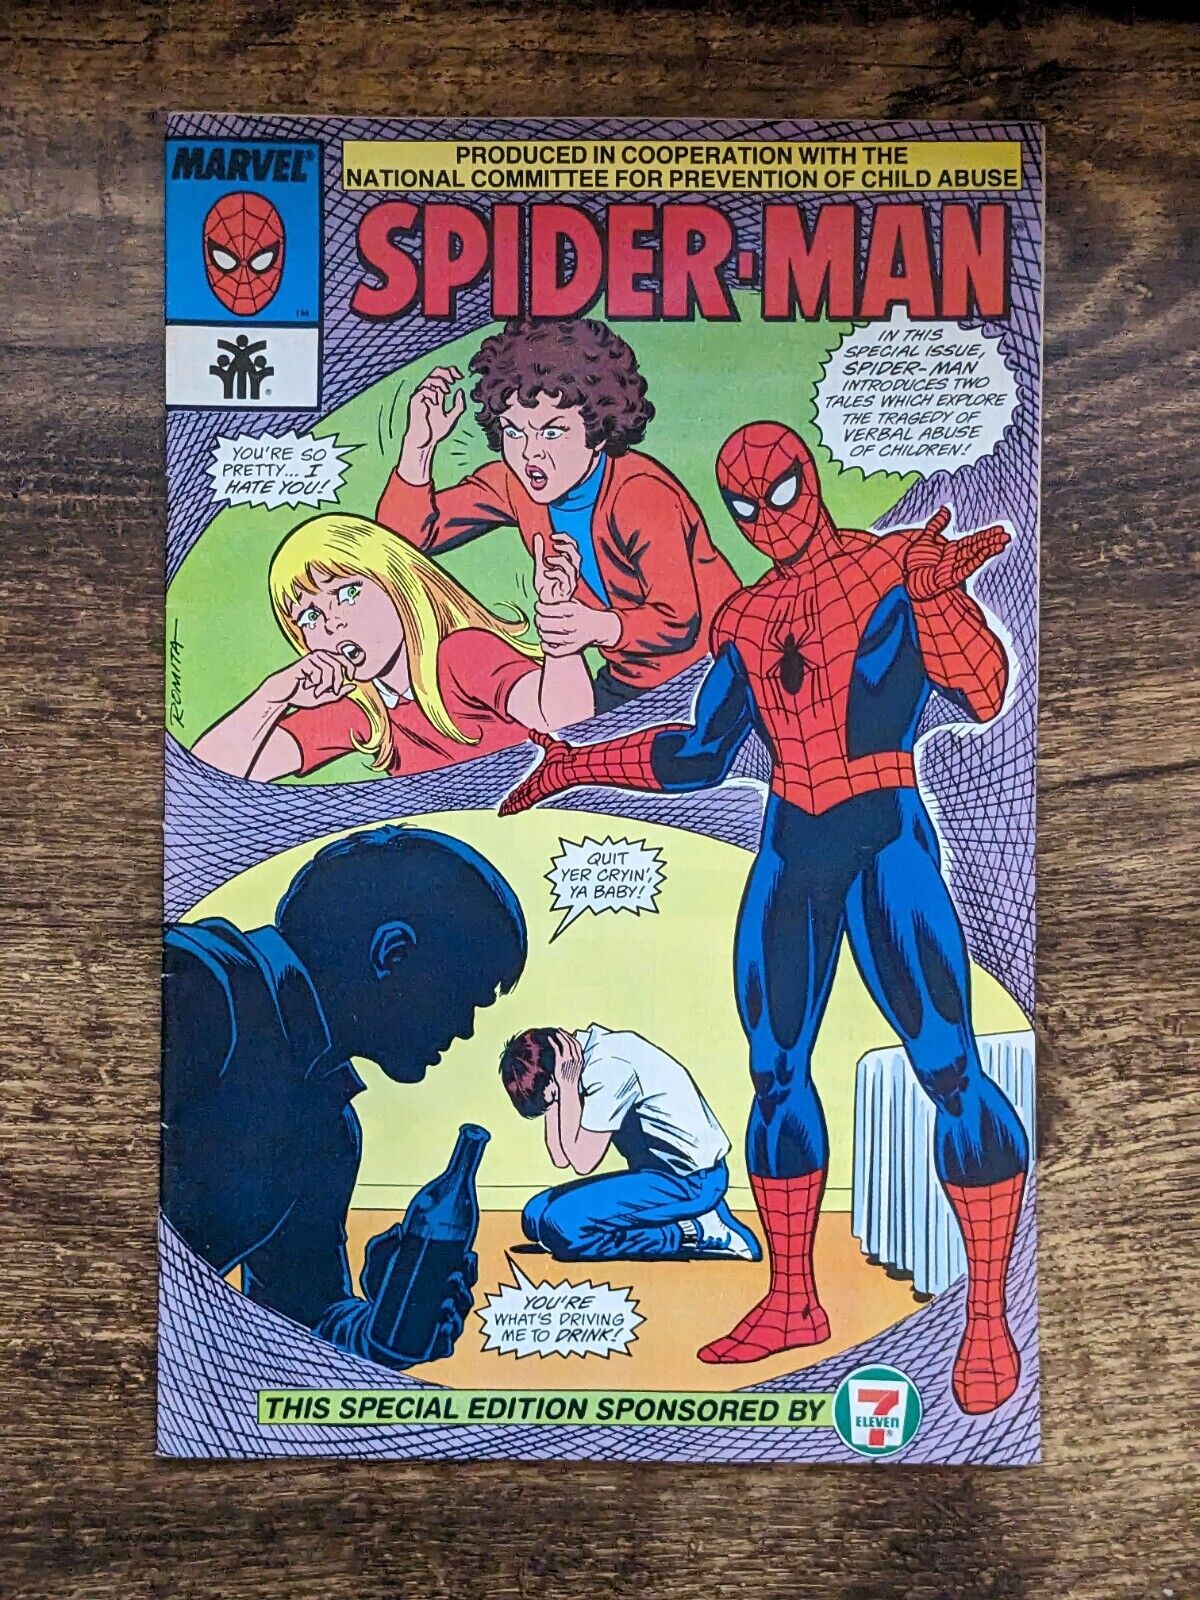 SPIDER-MAN SPECIAL EDITION 1987 Comic Book - Vintage Exclusive Against Child Abuse - Asylum Books